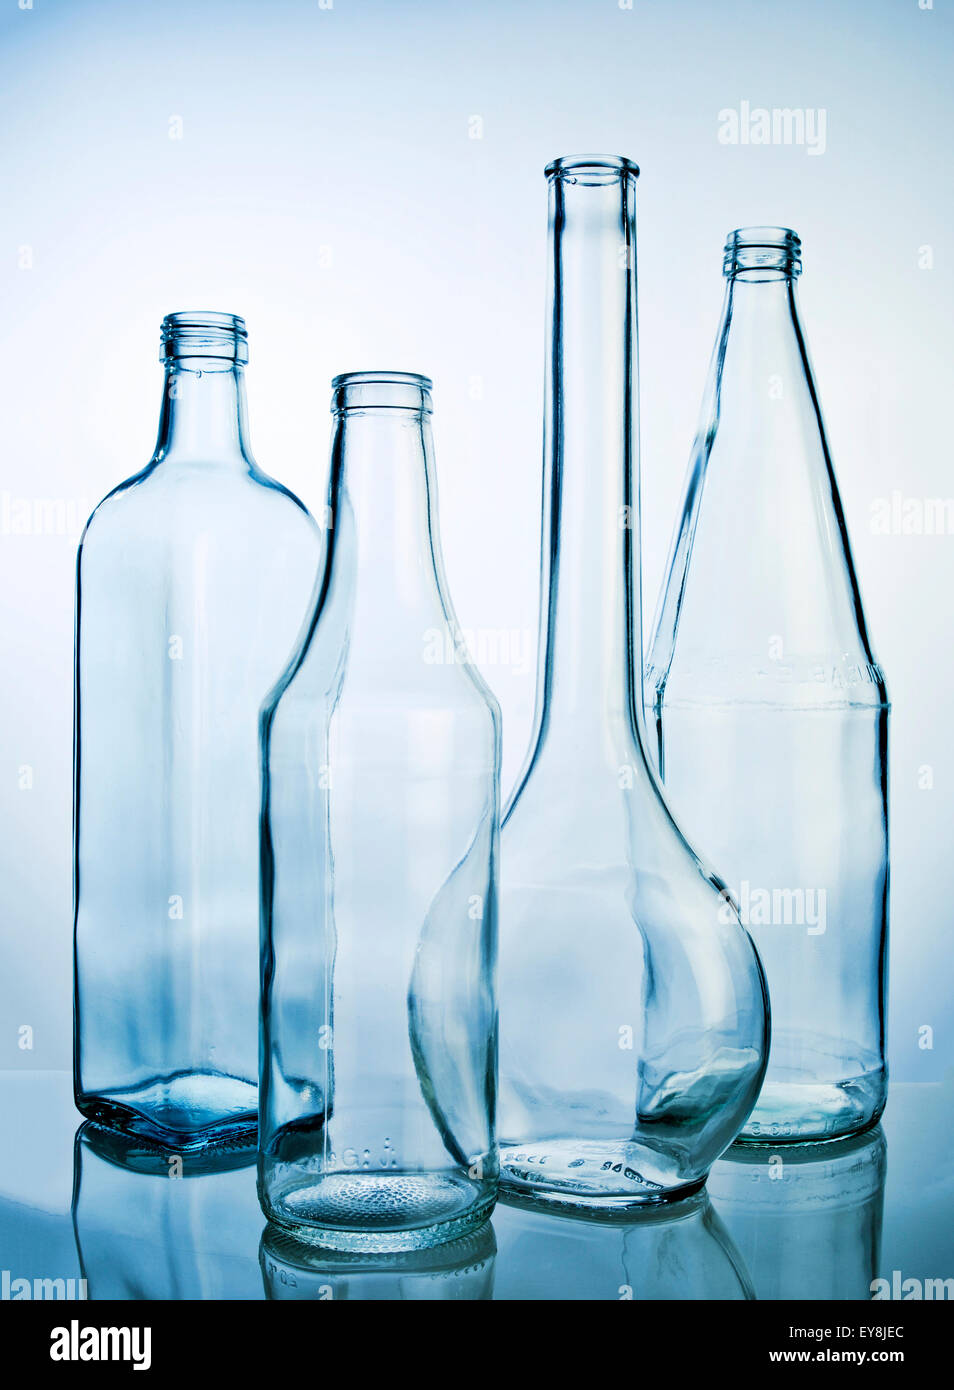 Four empty glass bottles in a row Stock Photo